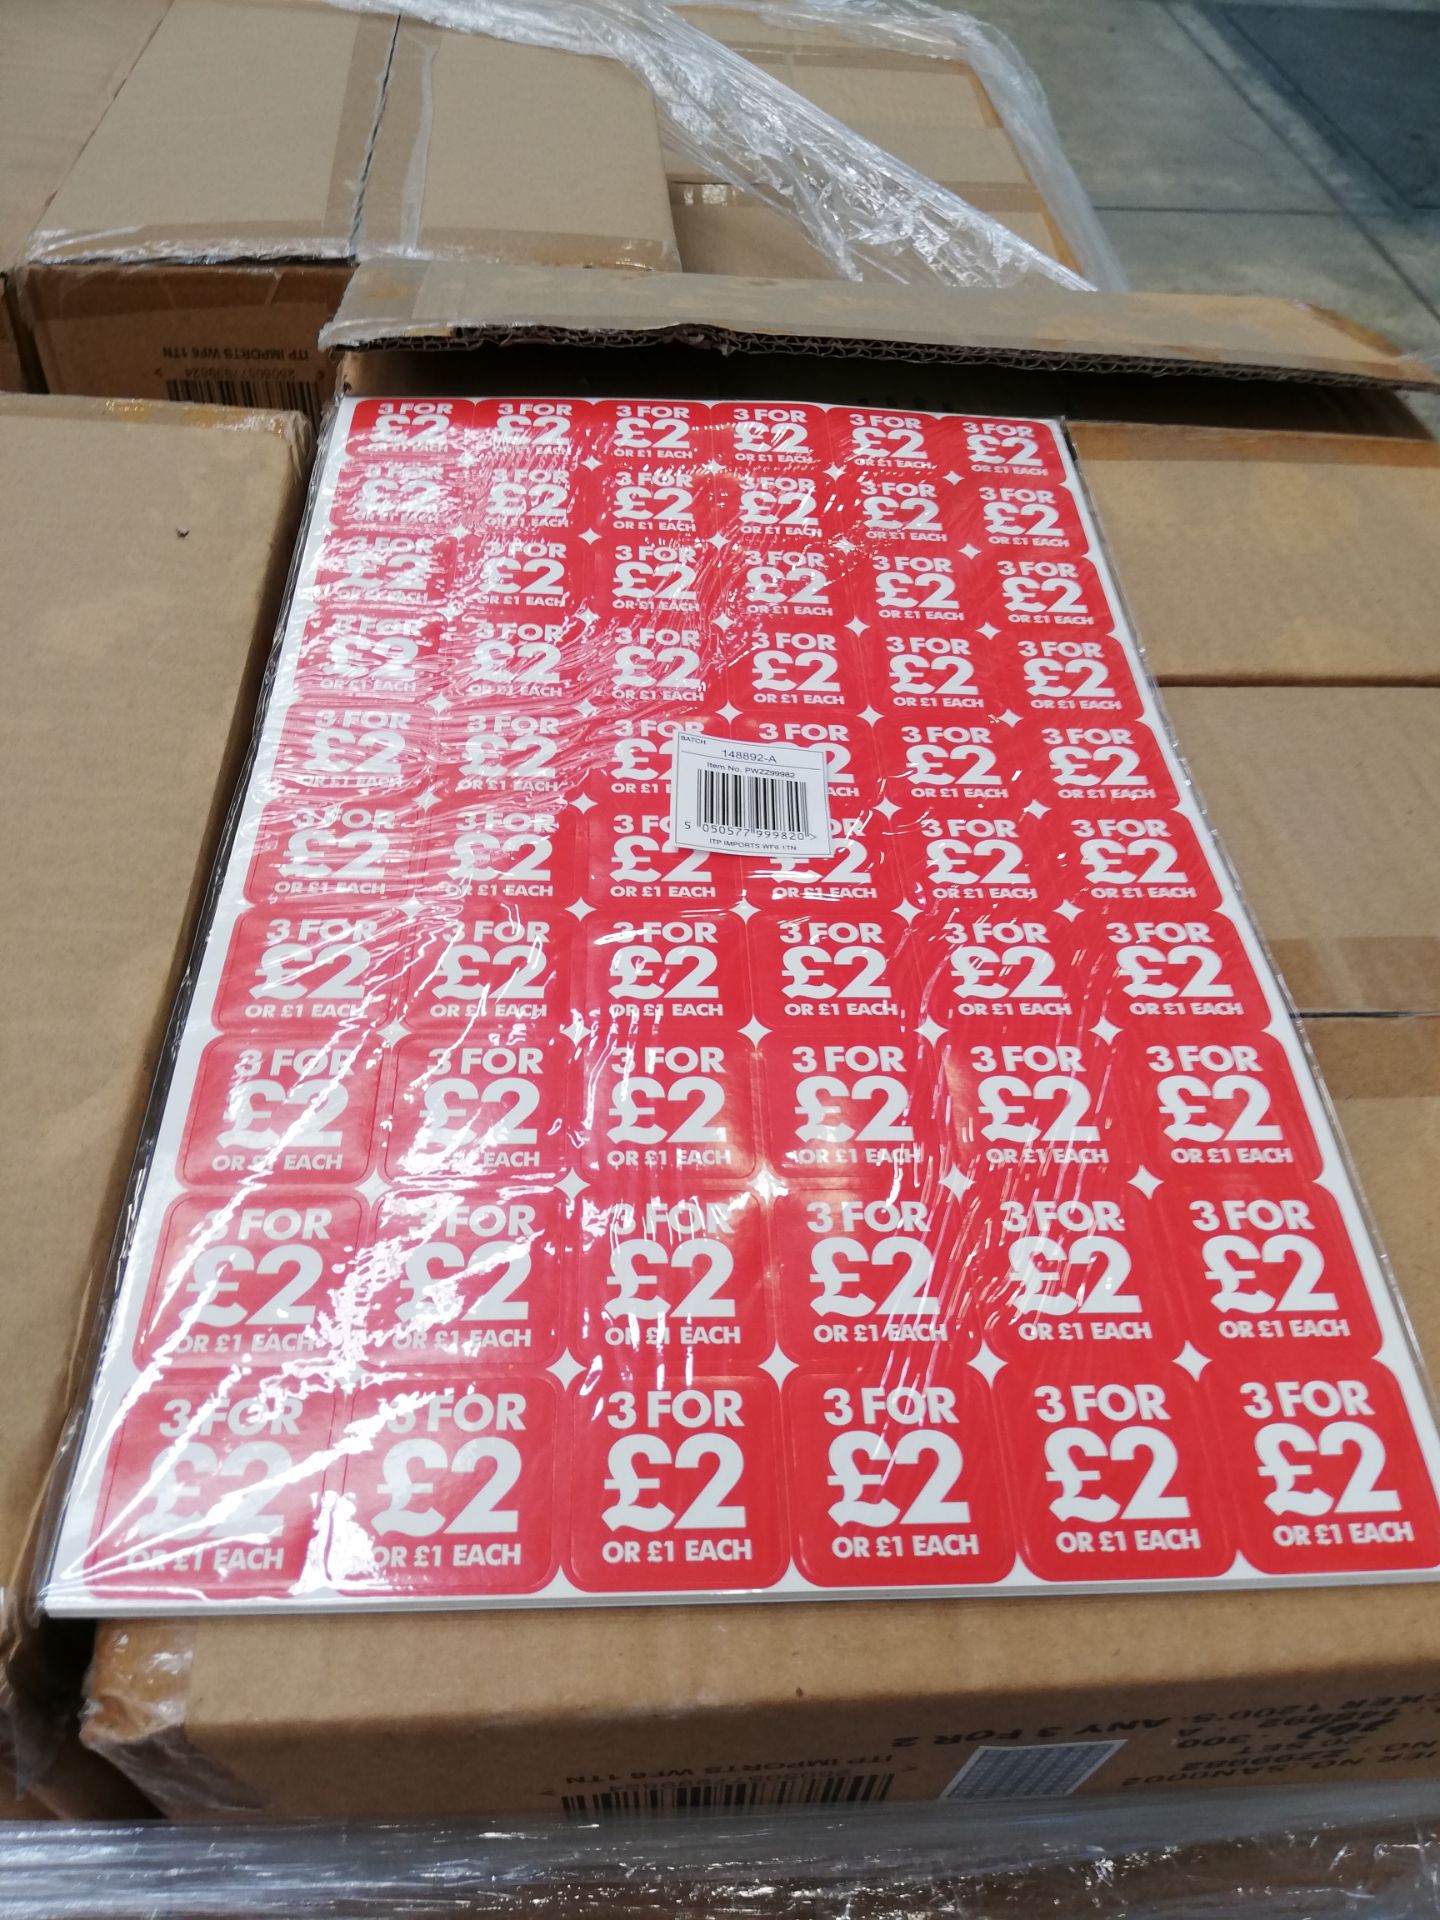 3,000 x Generic Sale Stickers ‘Any 3 for £2’ (Boxe